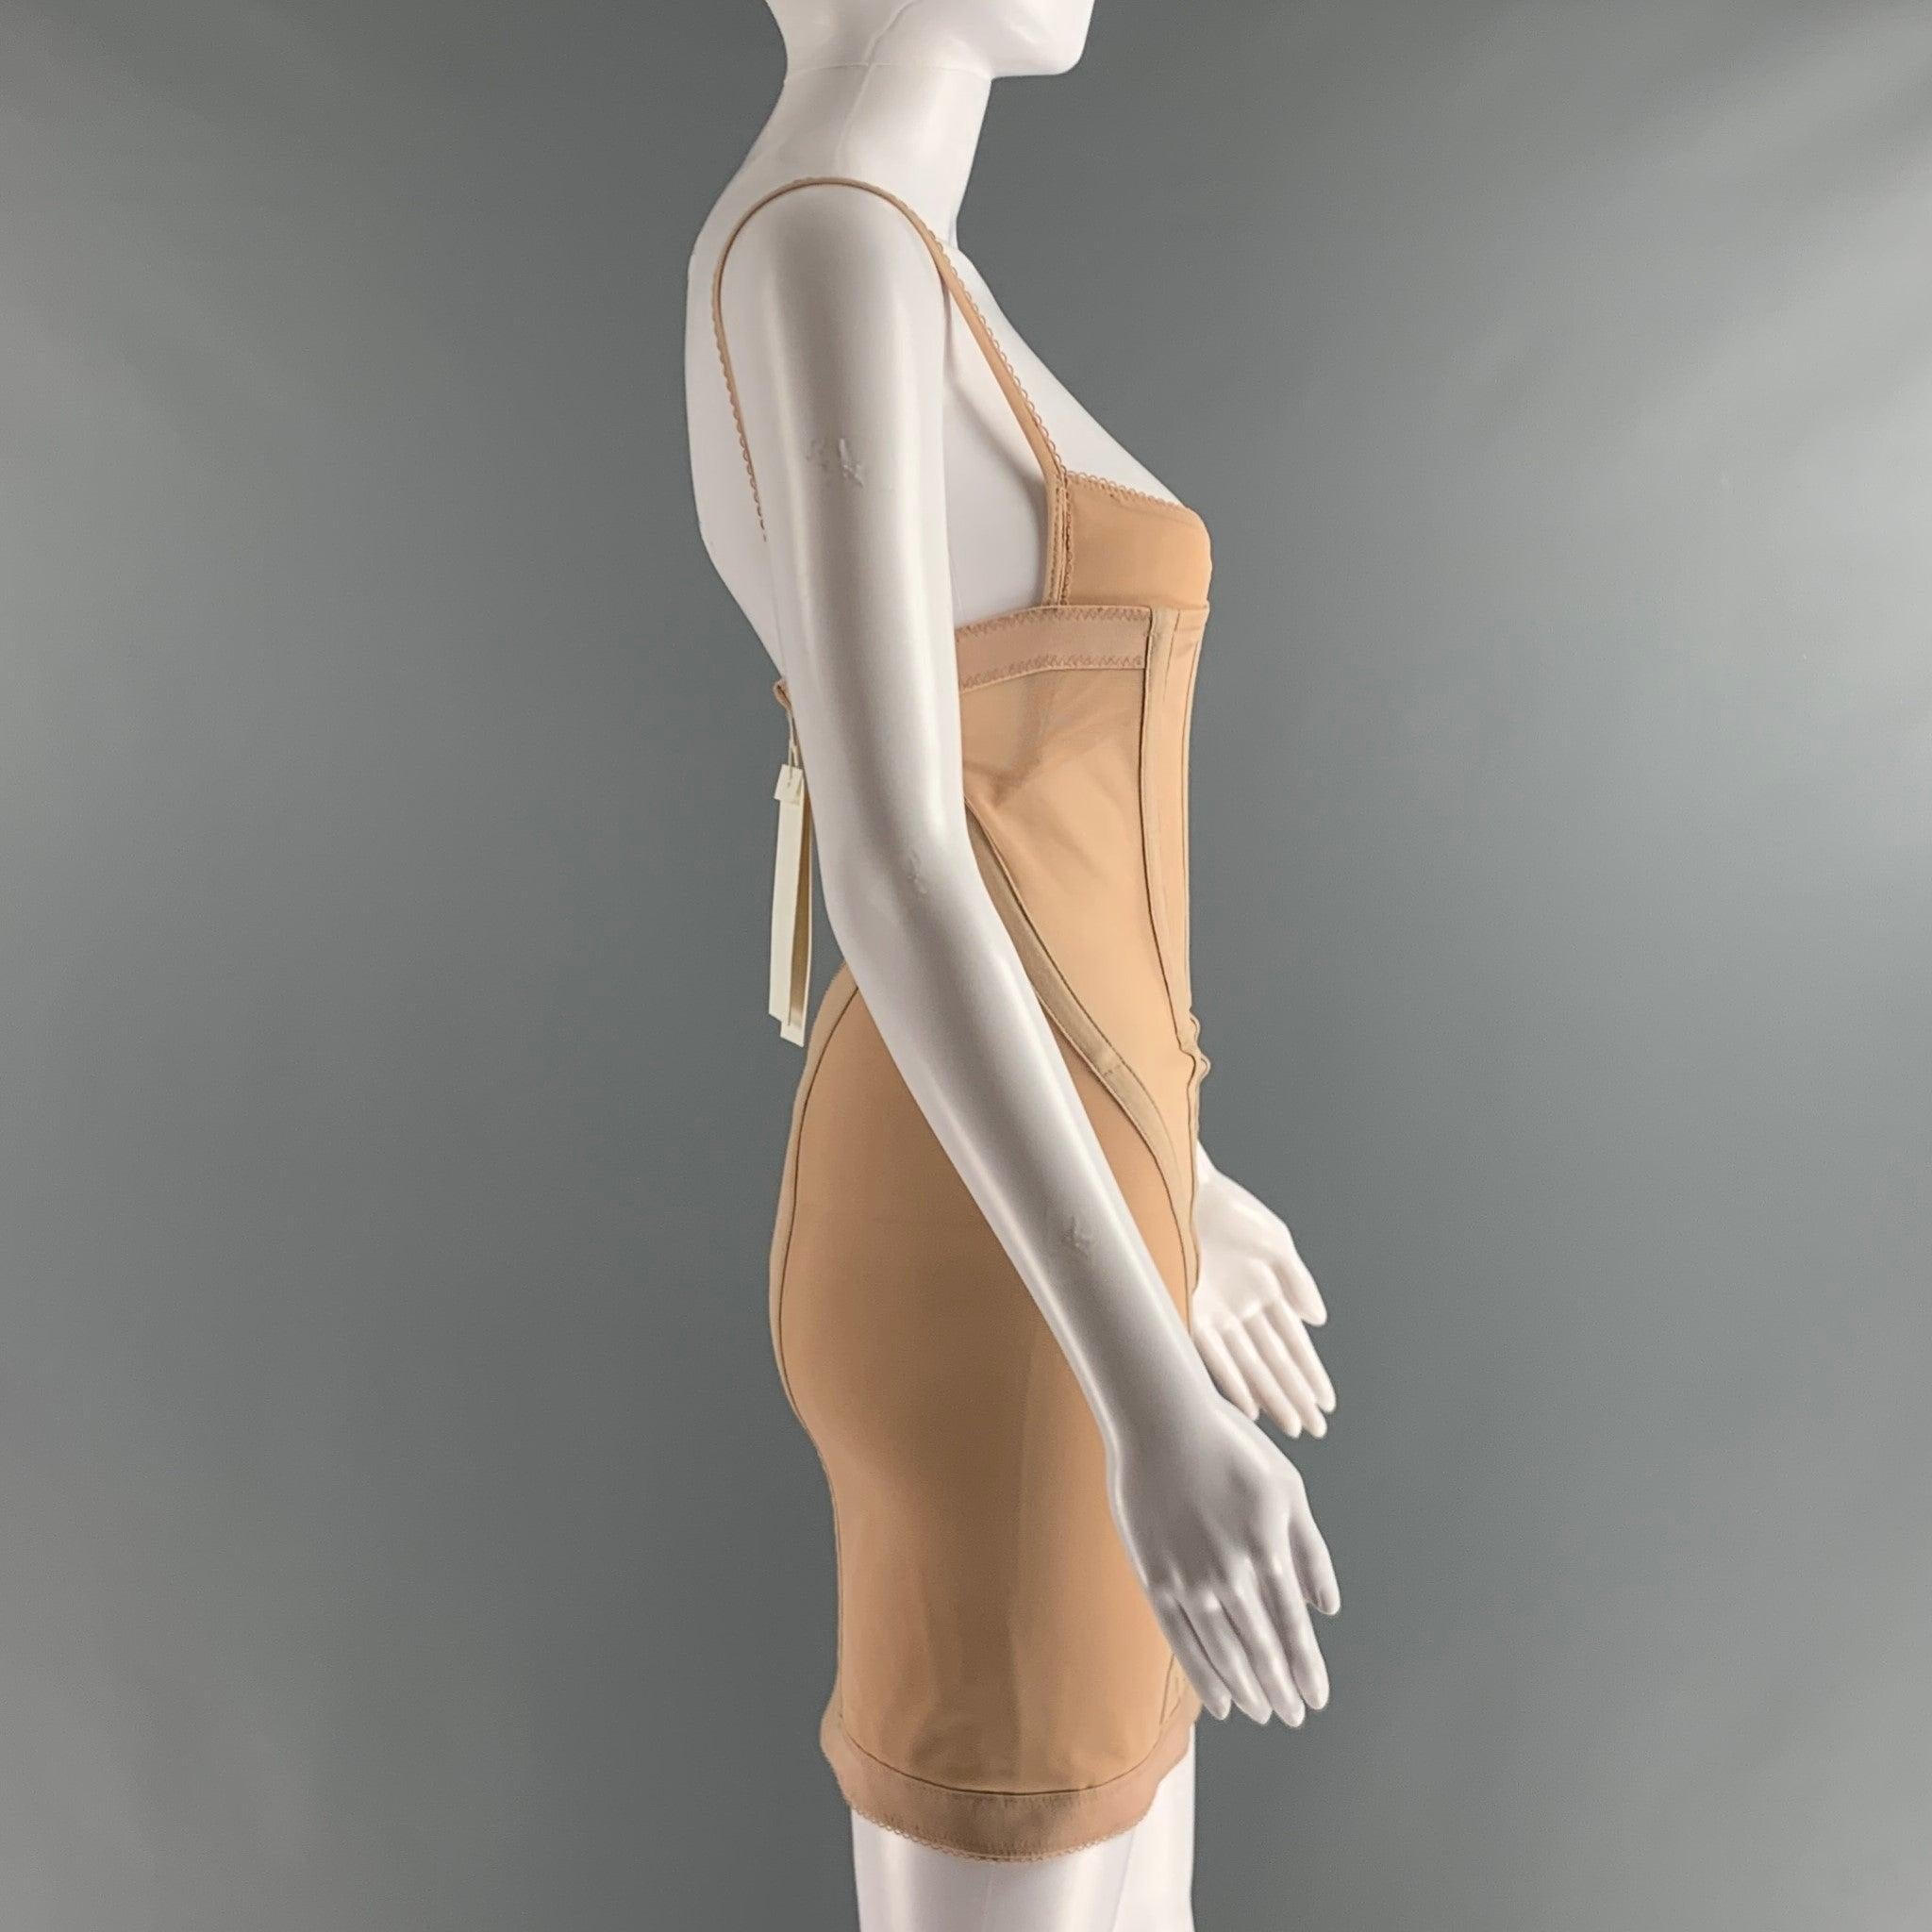 DION LEE mini dress comes in nude polyamide and elastane mesh knit material featuring corset dress design, back zip up closure, and spaghetti strap.New with Tags. 

Marked:   6 

Measurements: 
  Bust: 27 inWaist: 24 inHip: 30 inLength: 23.5 in
 
 